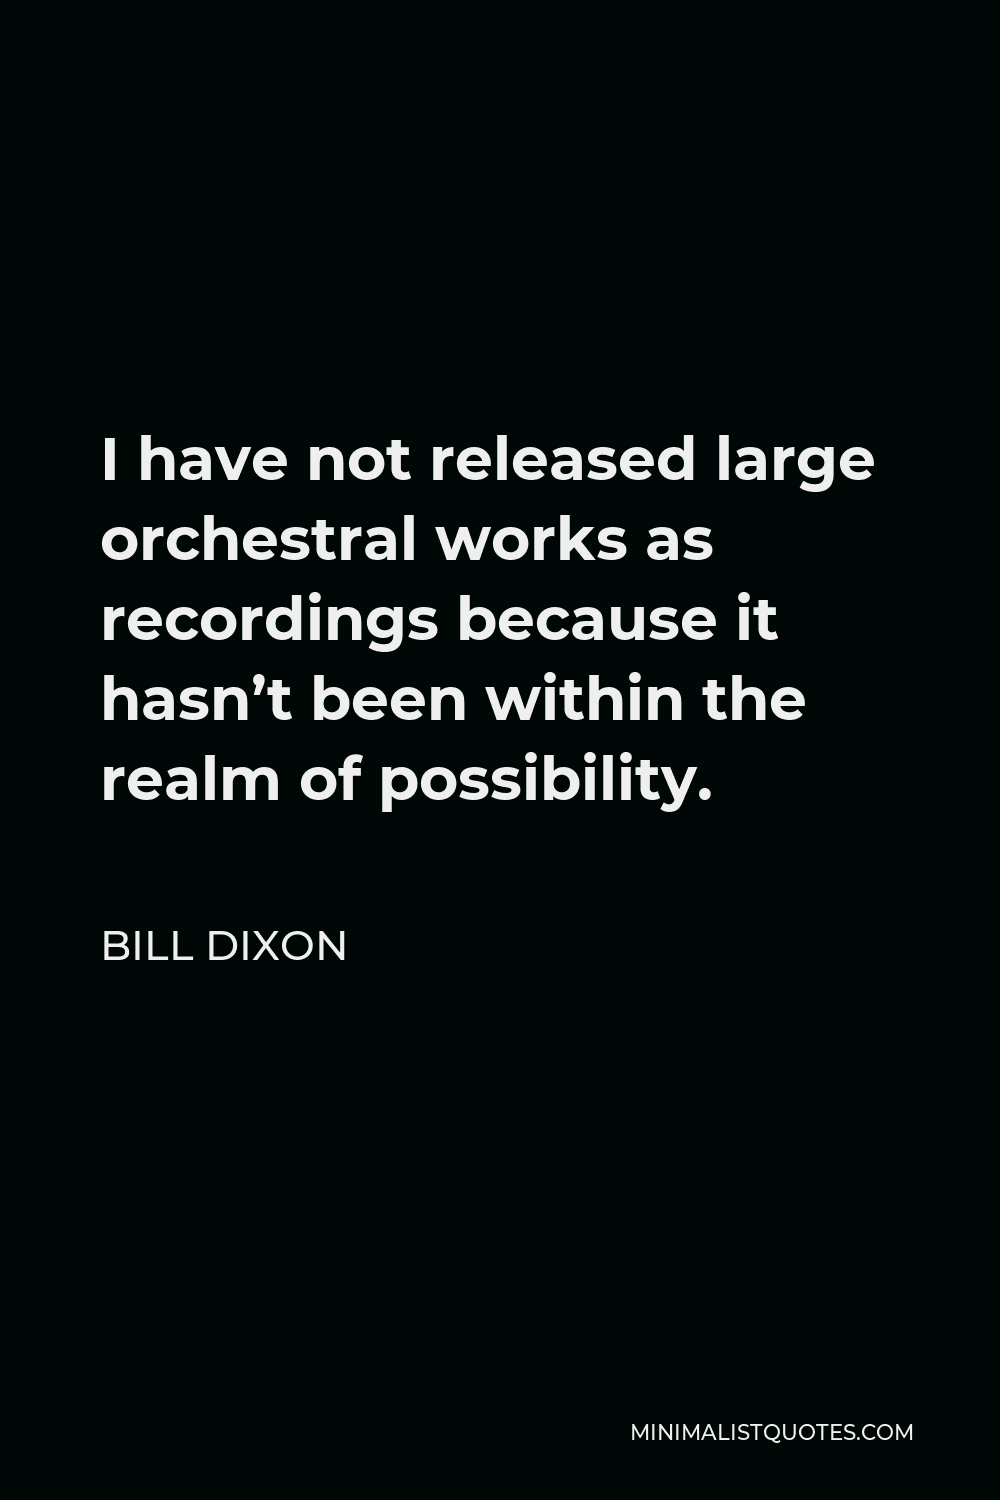 Bill Dixon Quote - I have not released large orchestral works as recordings because it hasn’t been within the realm of possibility.